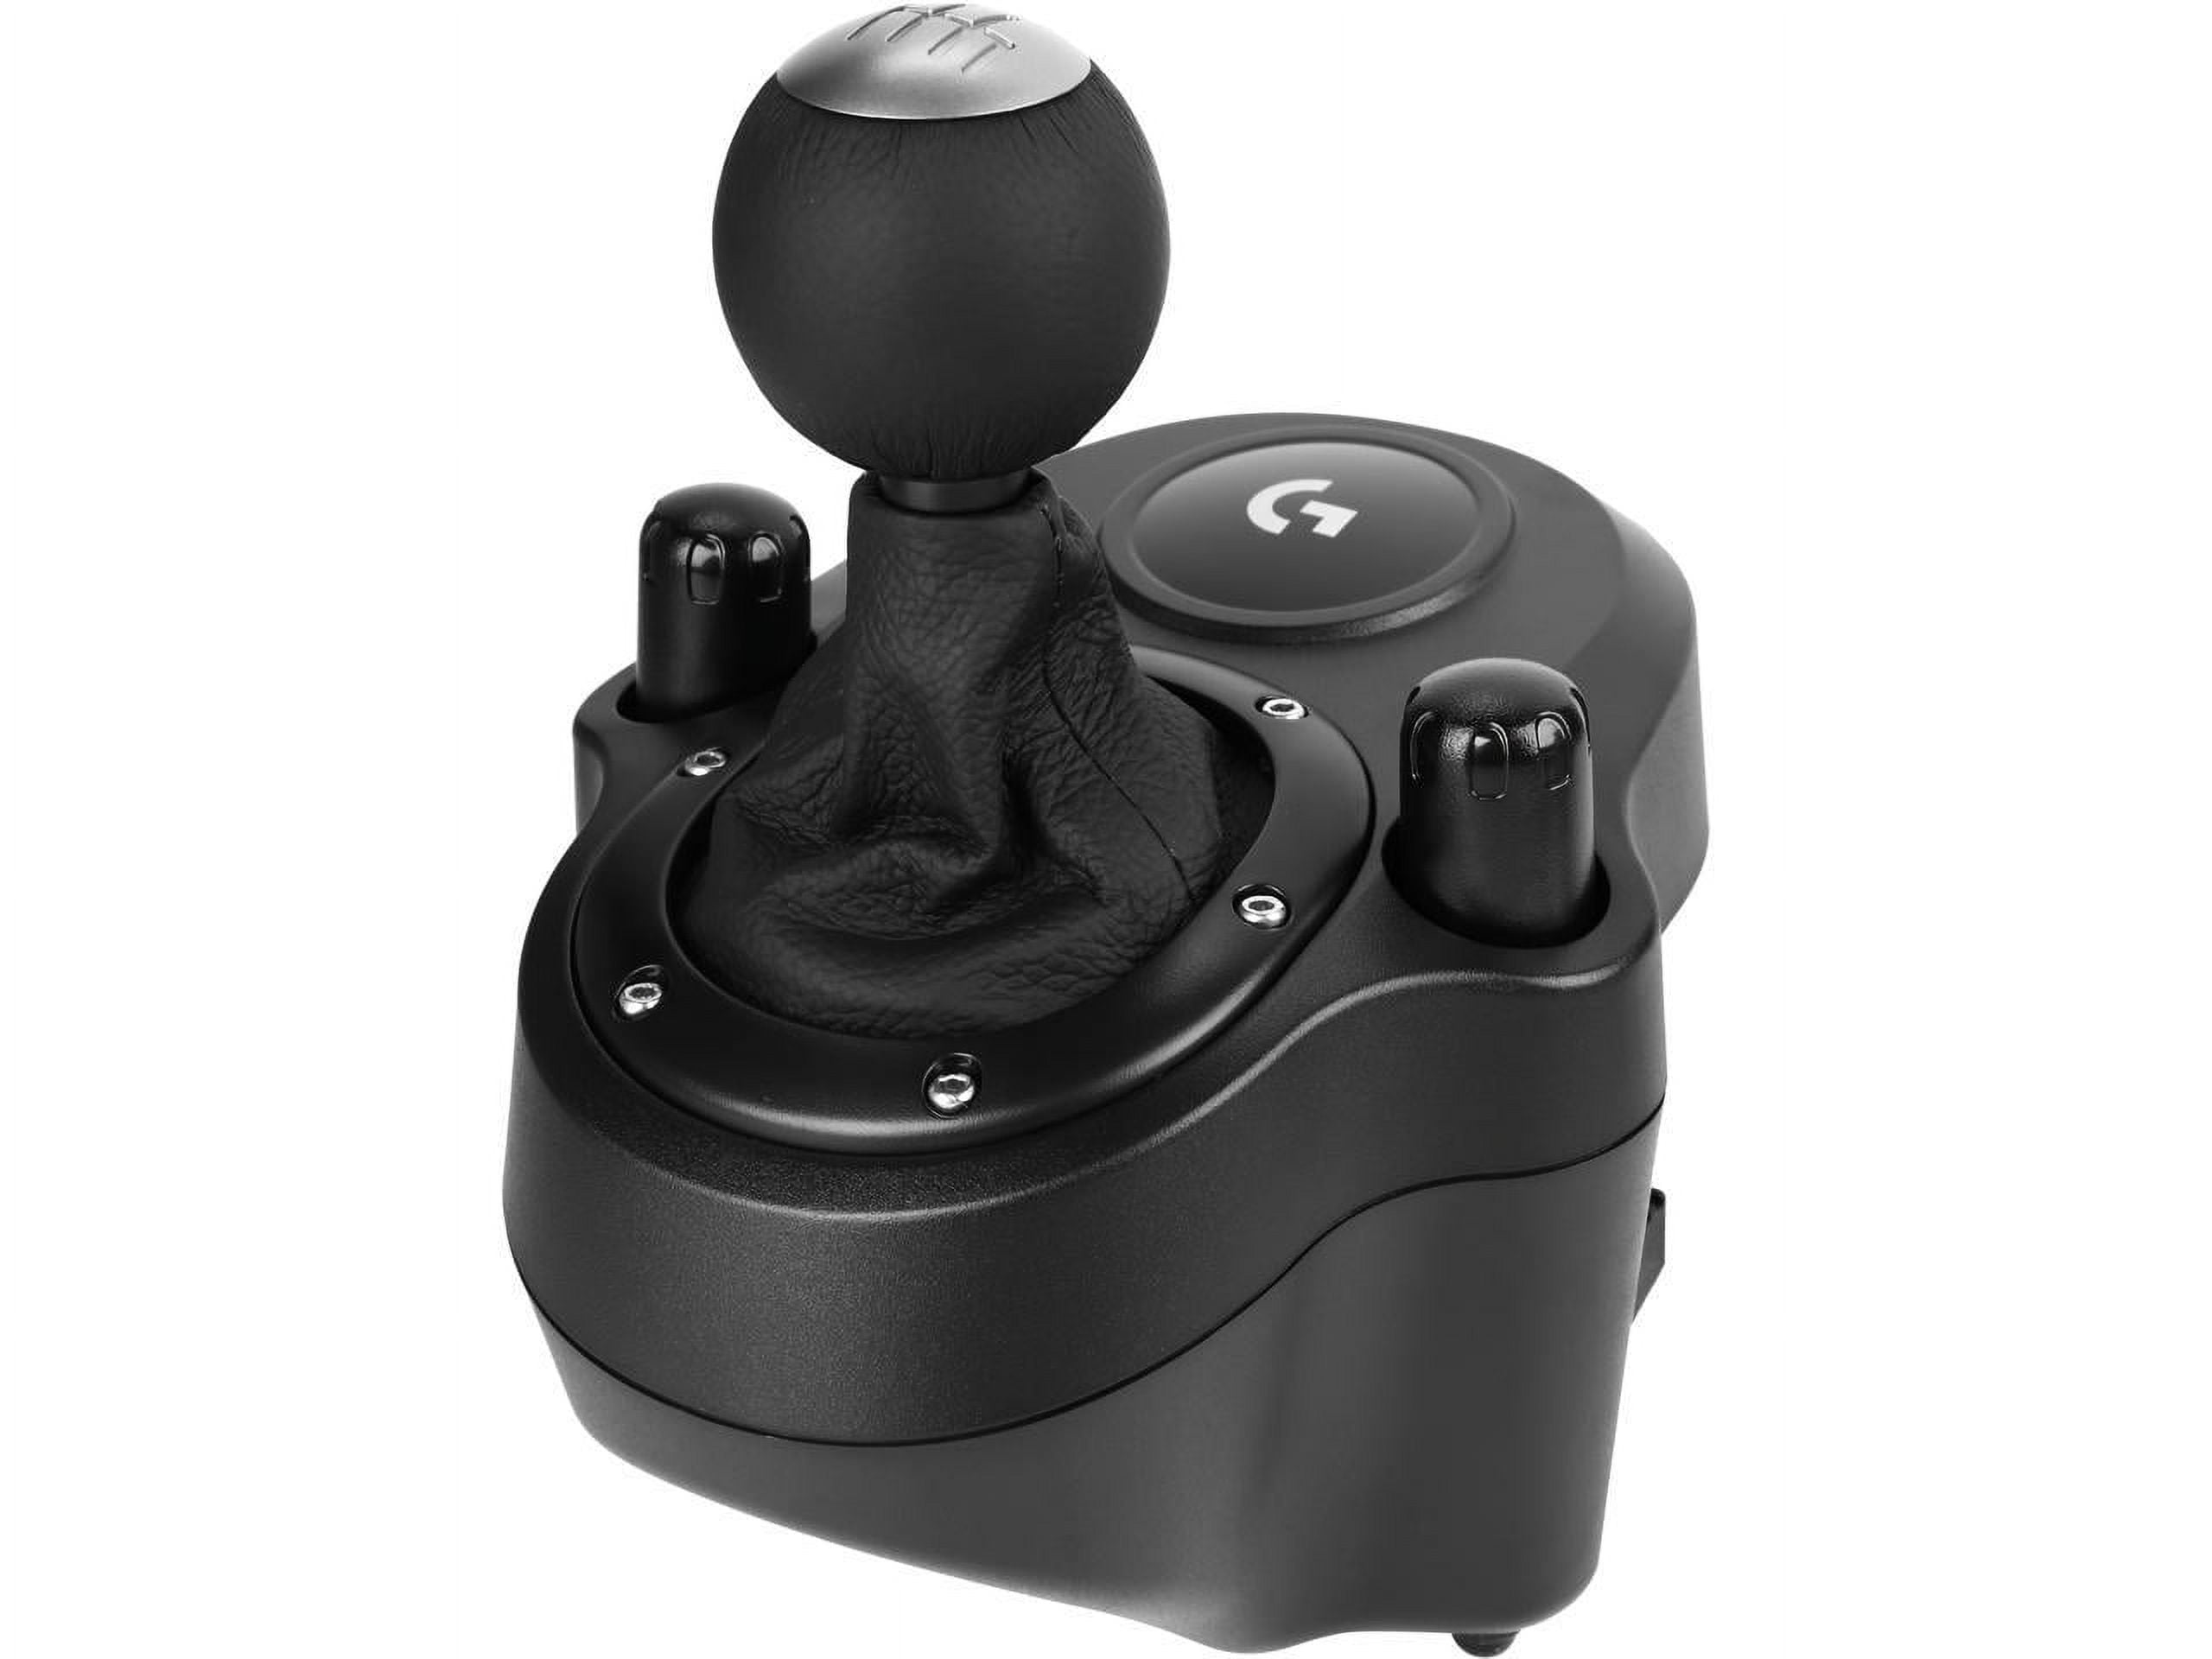 Logitech G Driving Force Shifter Compatible with G923, G29 and